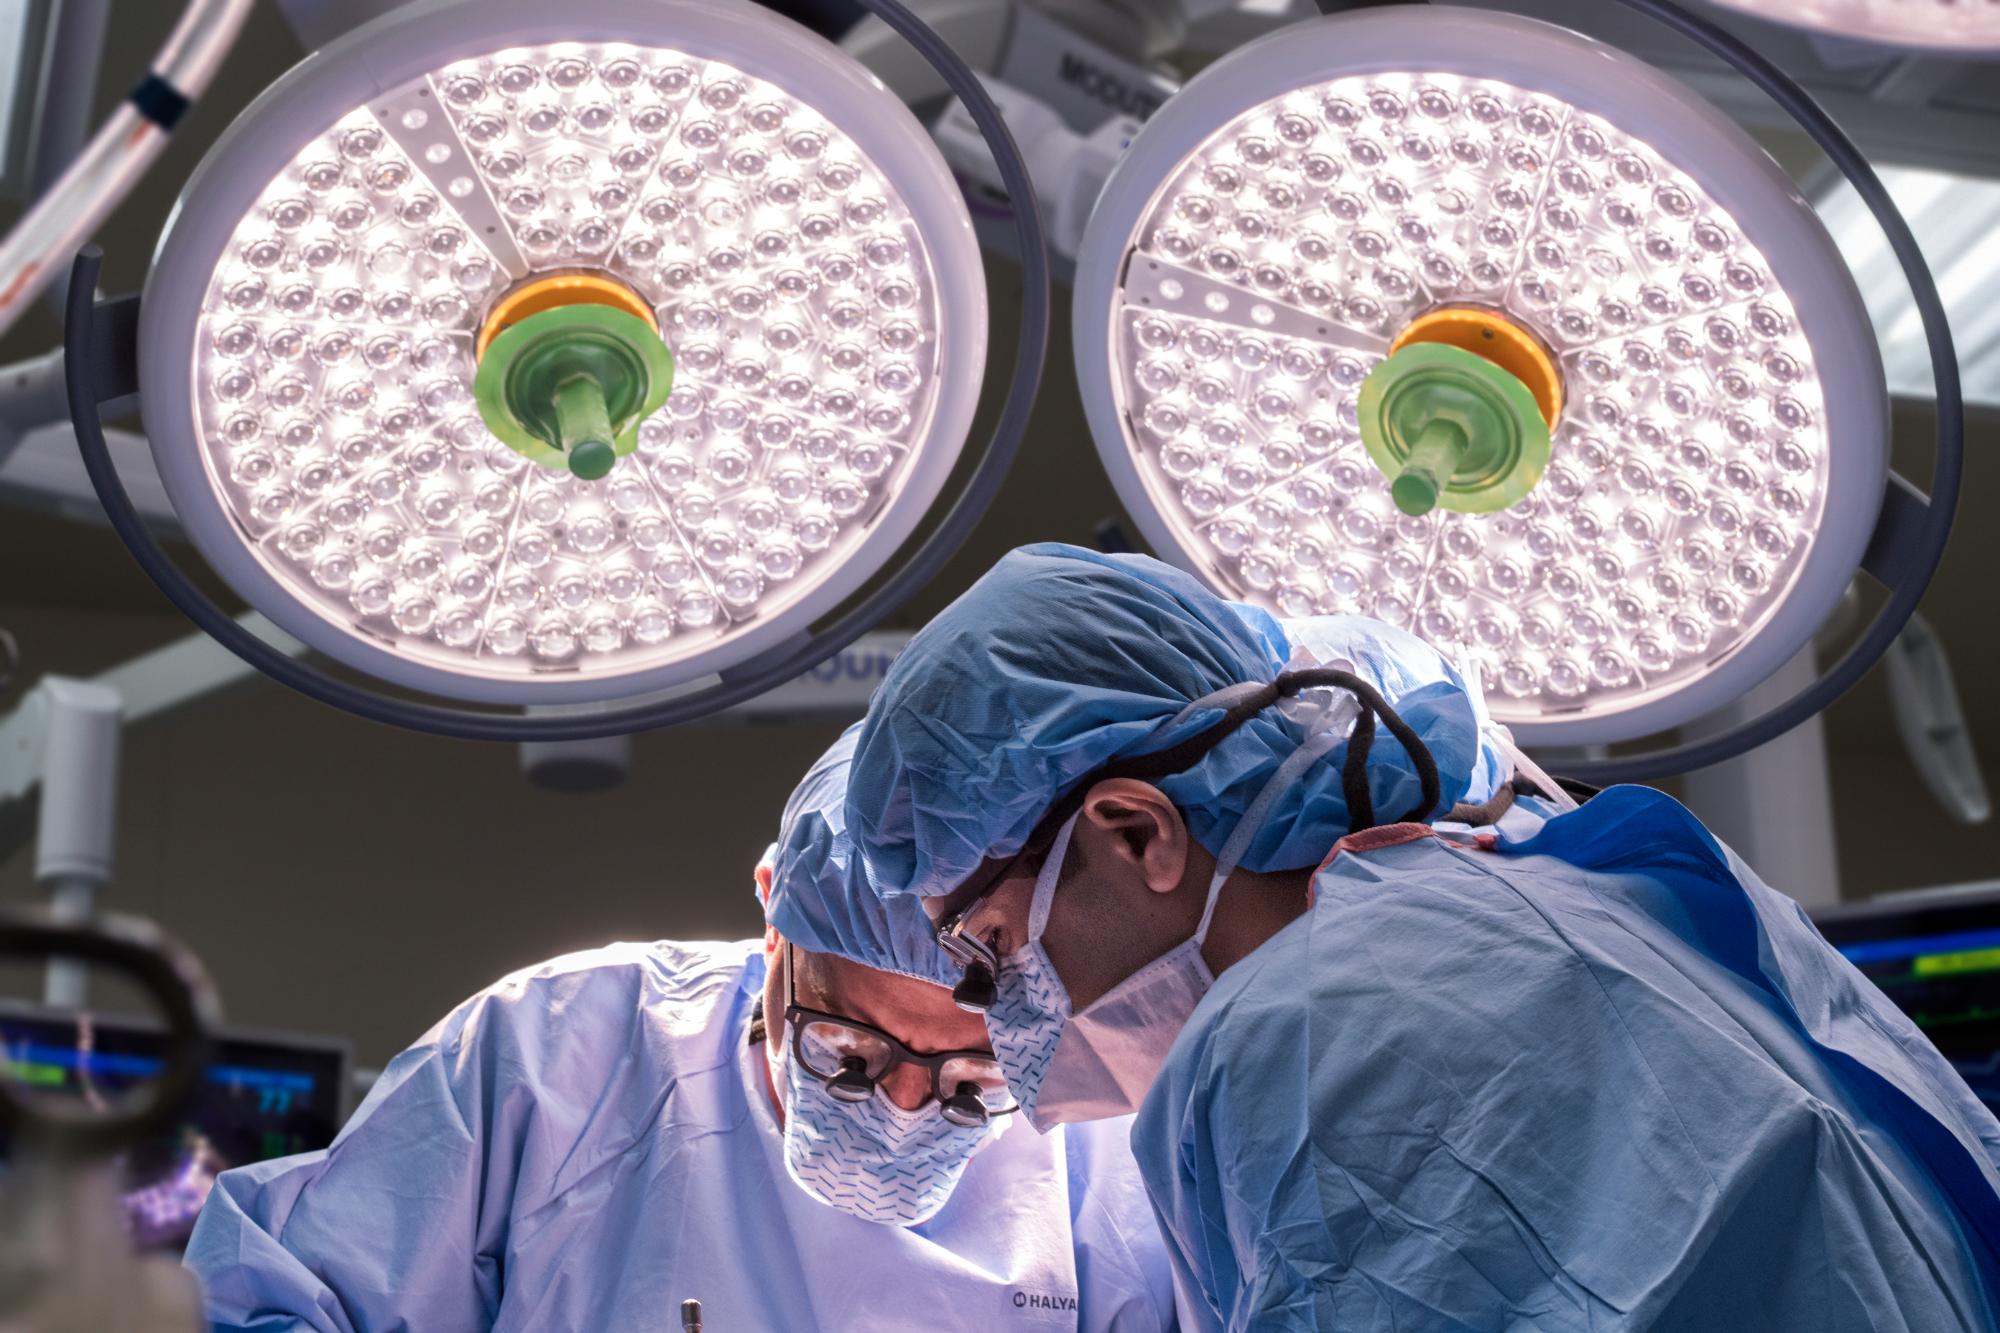 Two surgeons operating under large lights